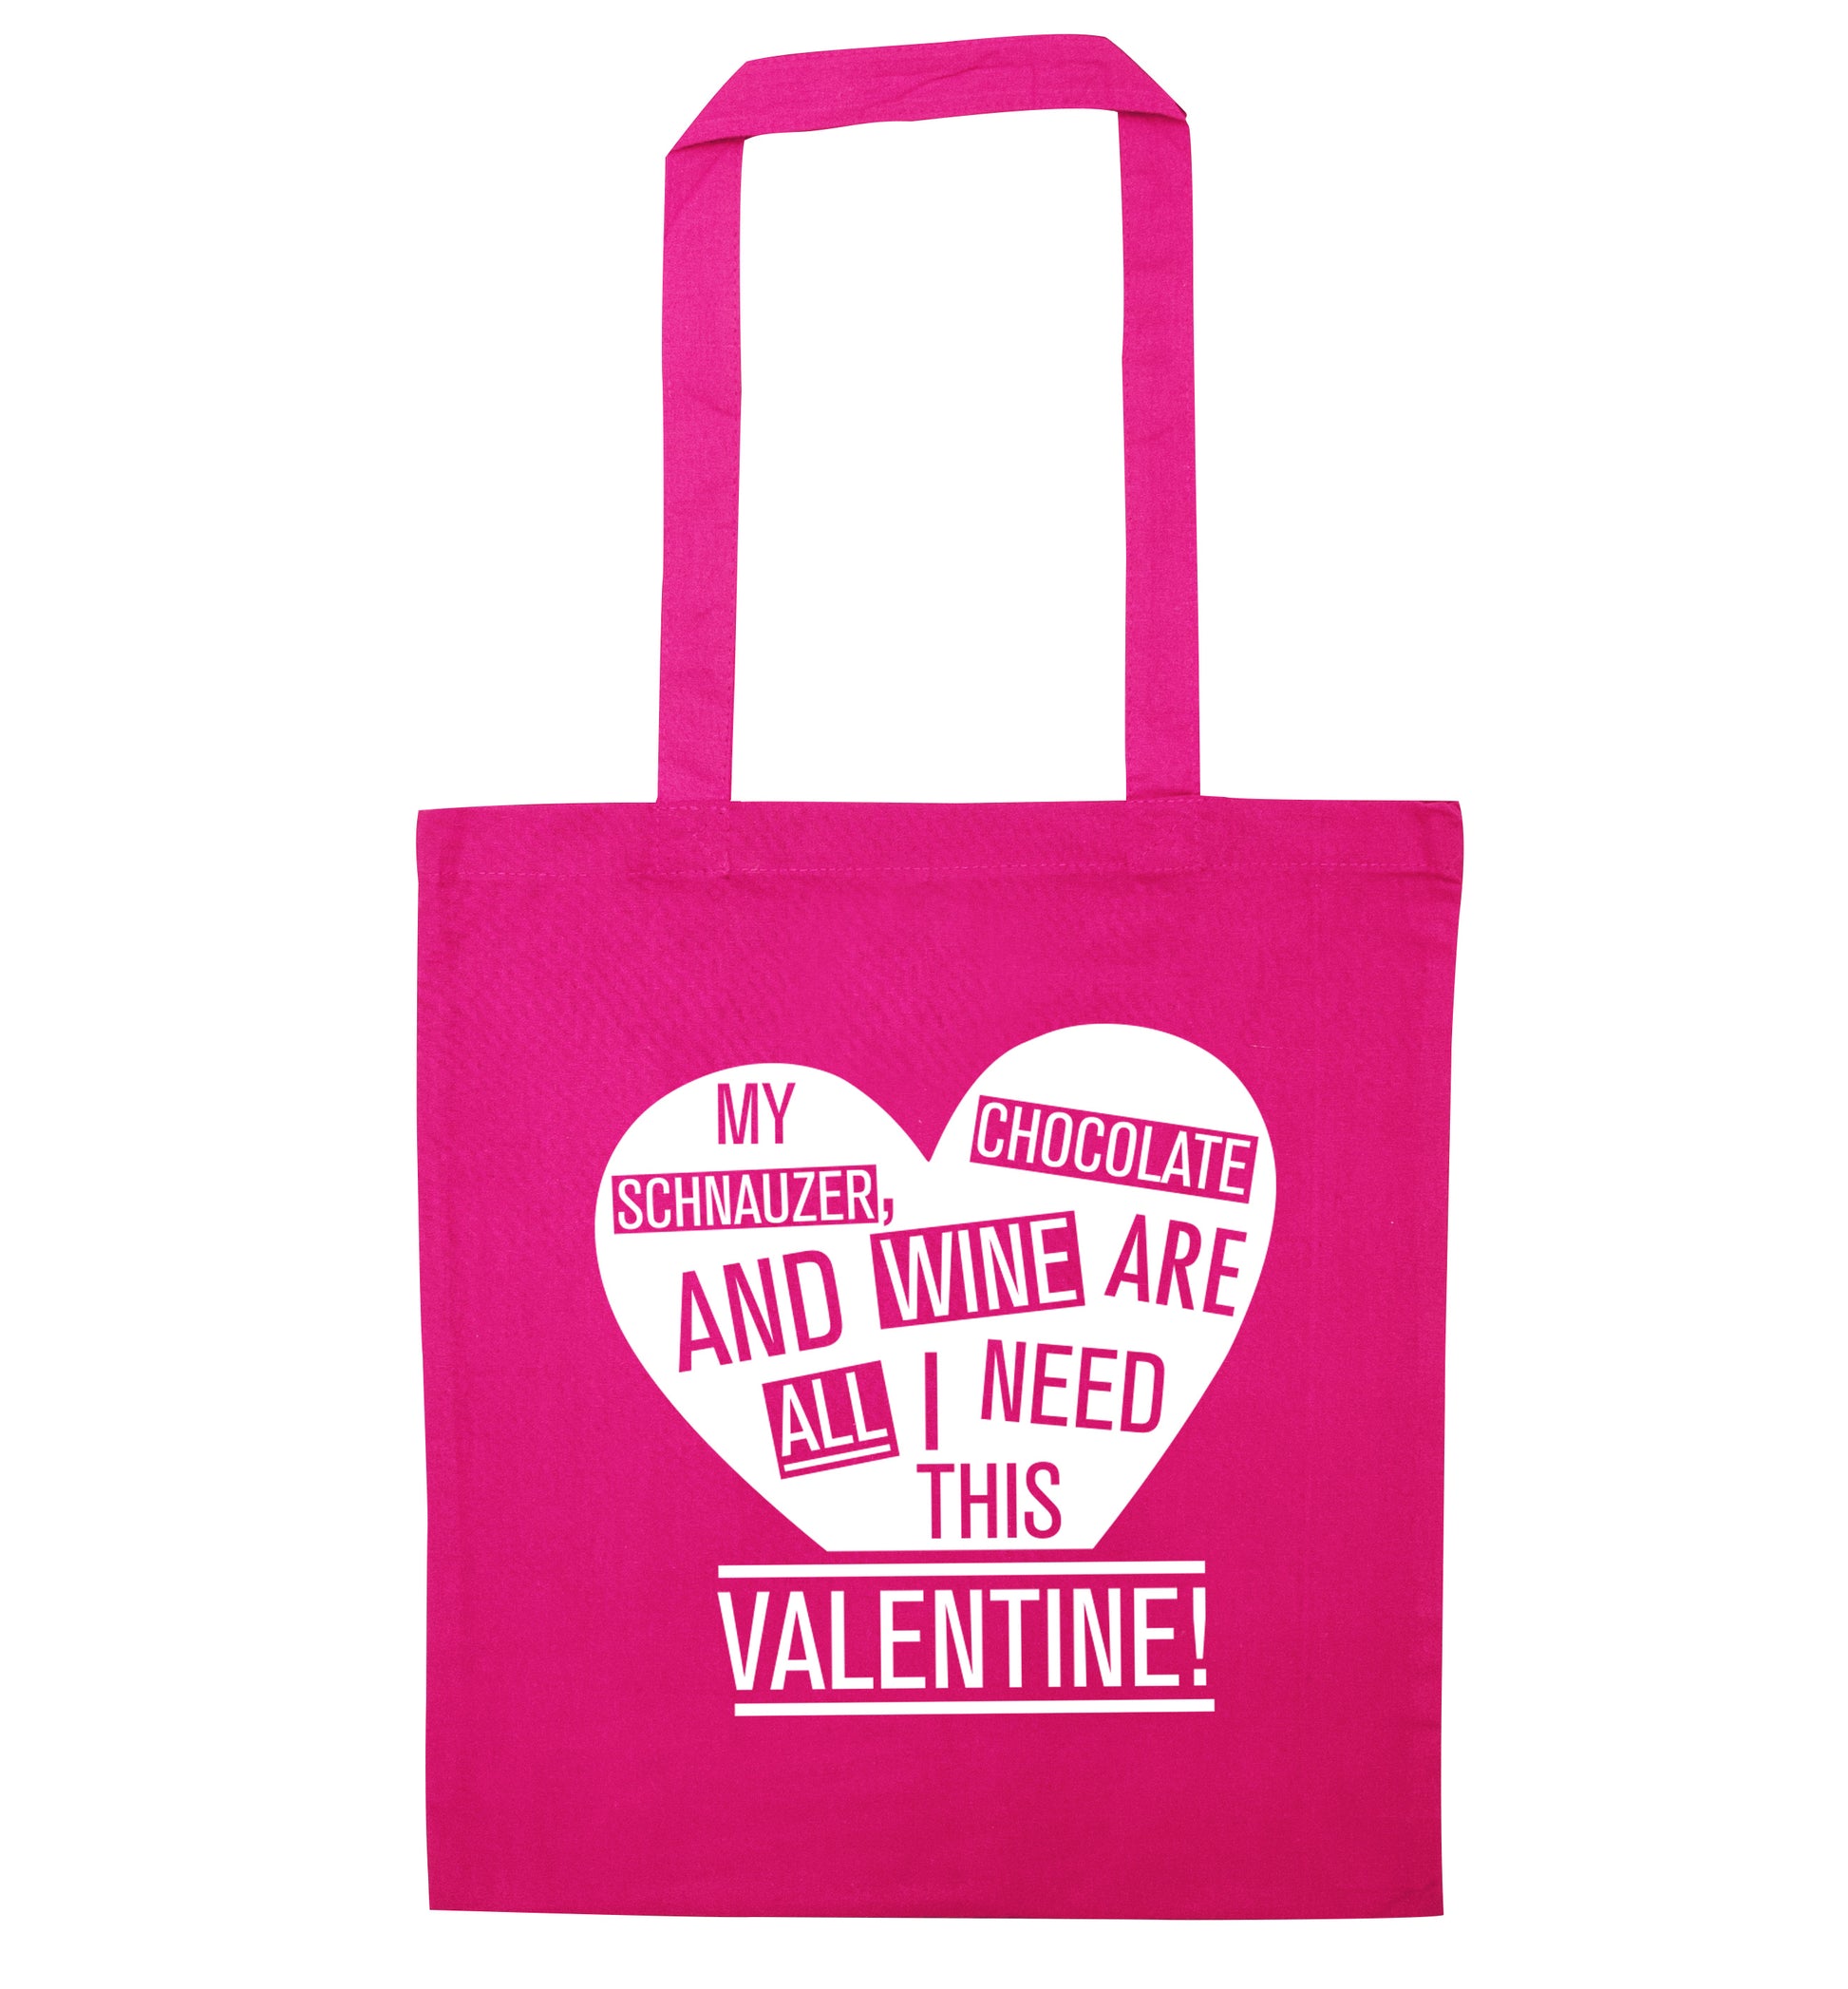 My schnauzer, chocolate and wine are all I need this valentine! pink tote bag